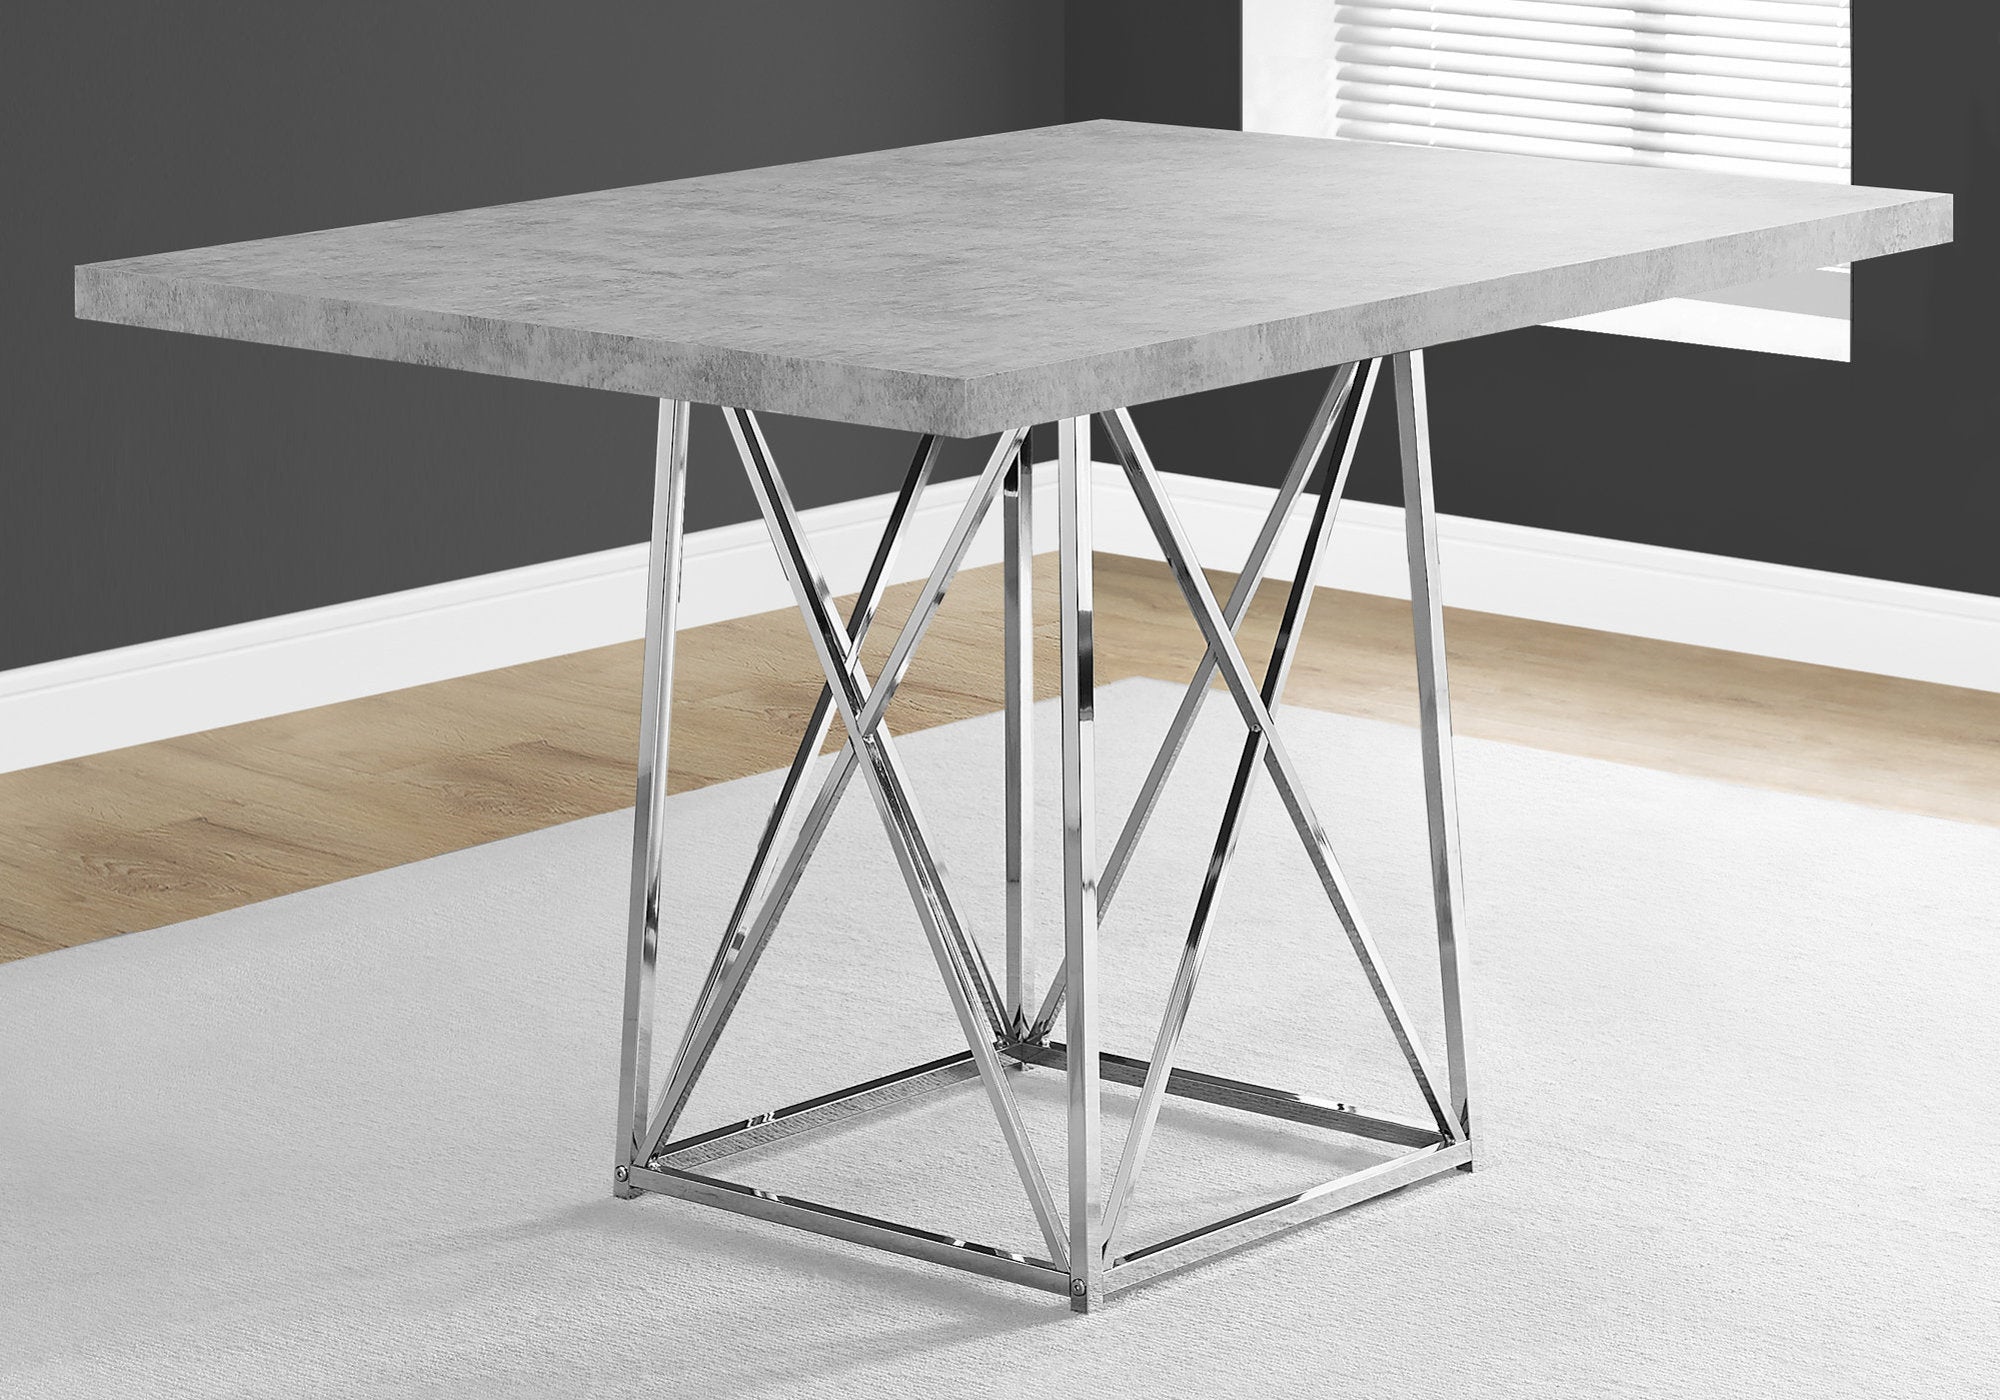 MN-241043    Dining Table, 48" Rectangular, Metal, Kitchen, Dining Room, Metal Base, Laminate, Grey Cement Look, Chrome, Contemporary, Modern